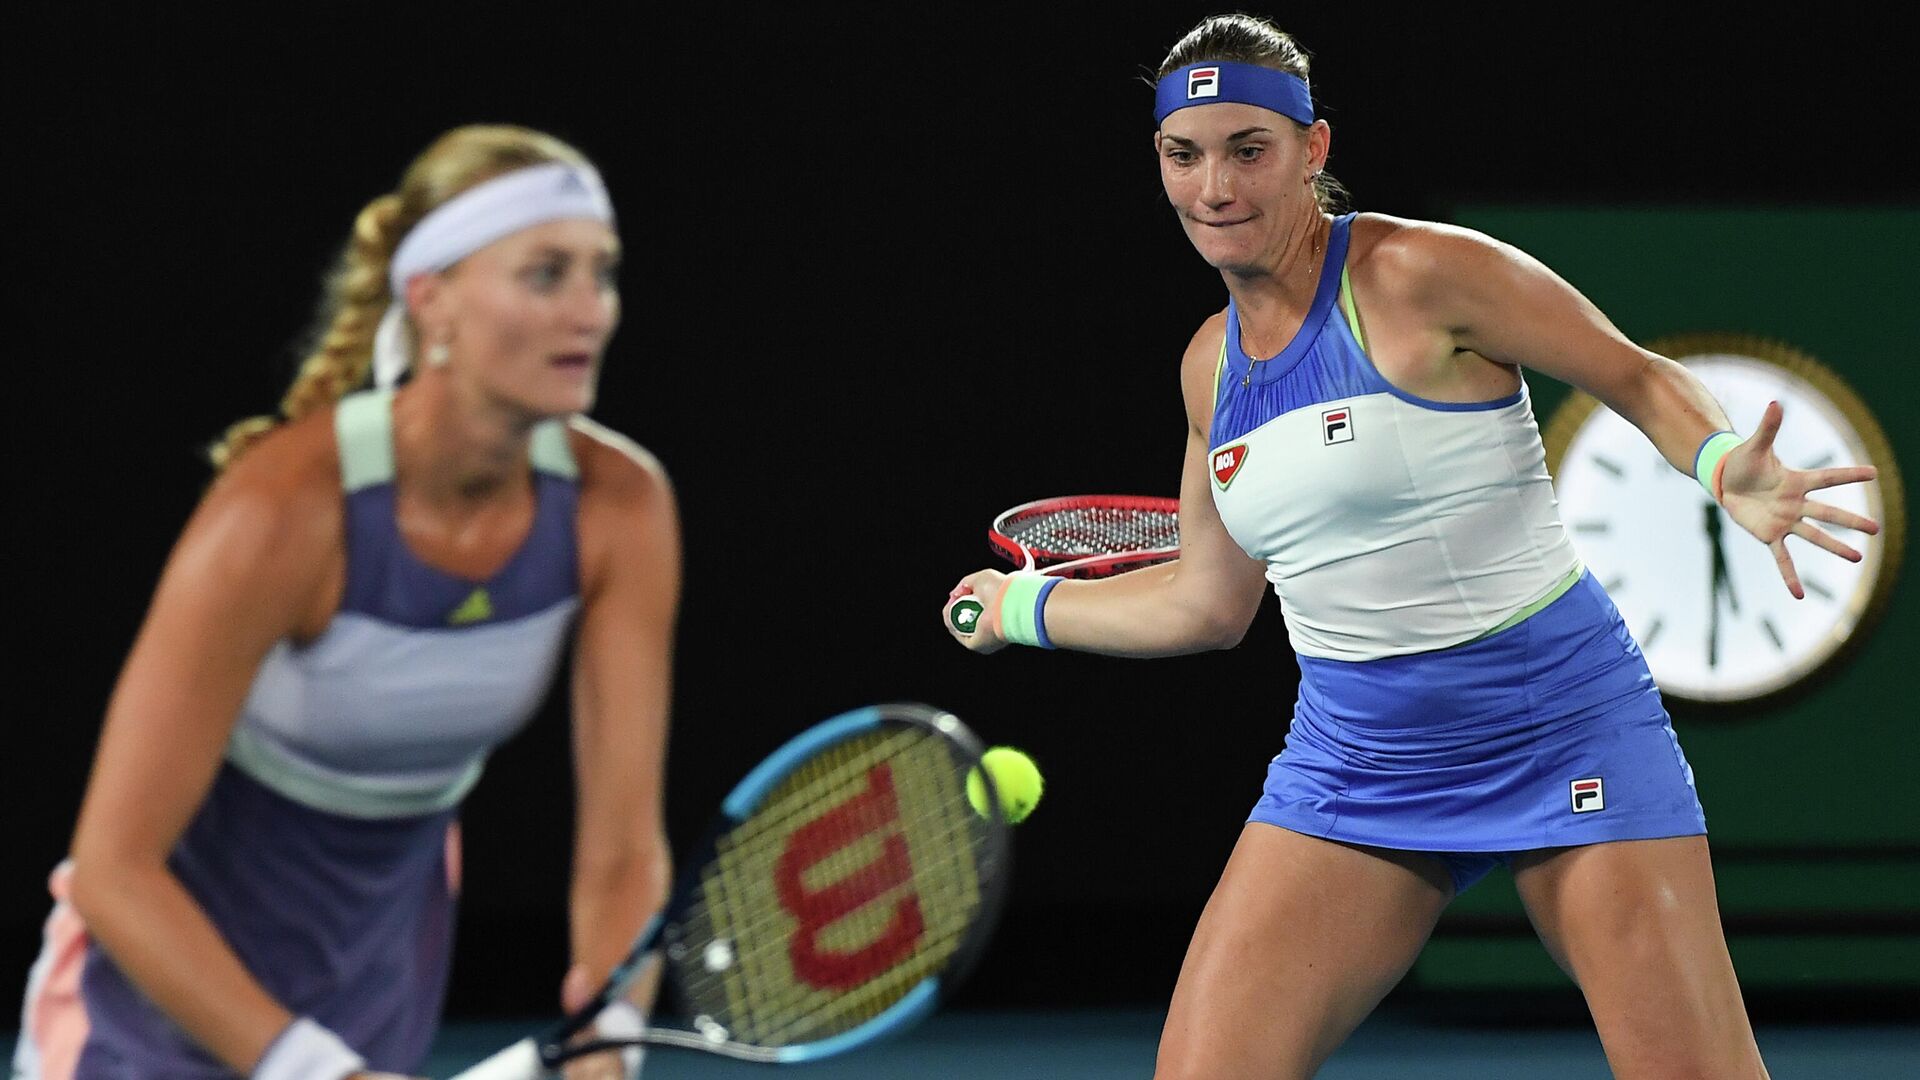 Hungary's Timea Babos (R) and France's Kristina Mladenovic (L) play a point against Taiwan's Hsieh Su-wei and Czech Republic's Barbora Strycova during the women's doubles final on day twelve of the Australian Open tennis tournament in Melbourne on January 31, 2020. (Photo by Greg Wood / AFP) / IMAGE RESTRICTED TO EDITORIAL USE - STRICTLY NO COMMERCIAL USE - РИА Новости, 1920, 05.09.2020